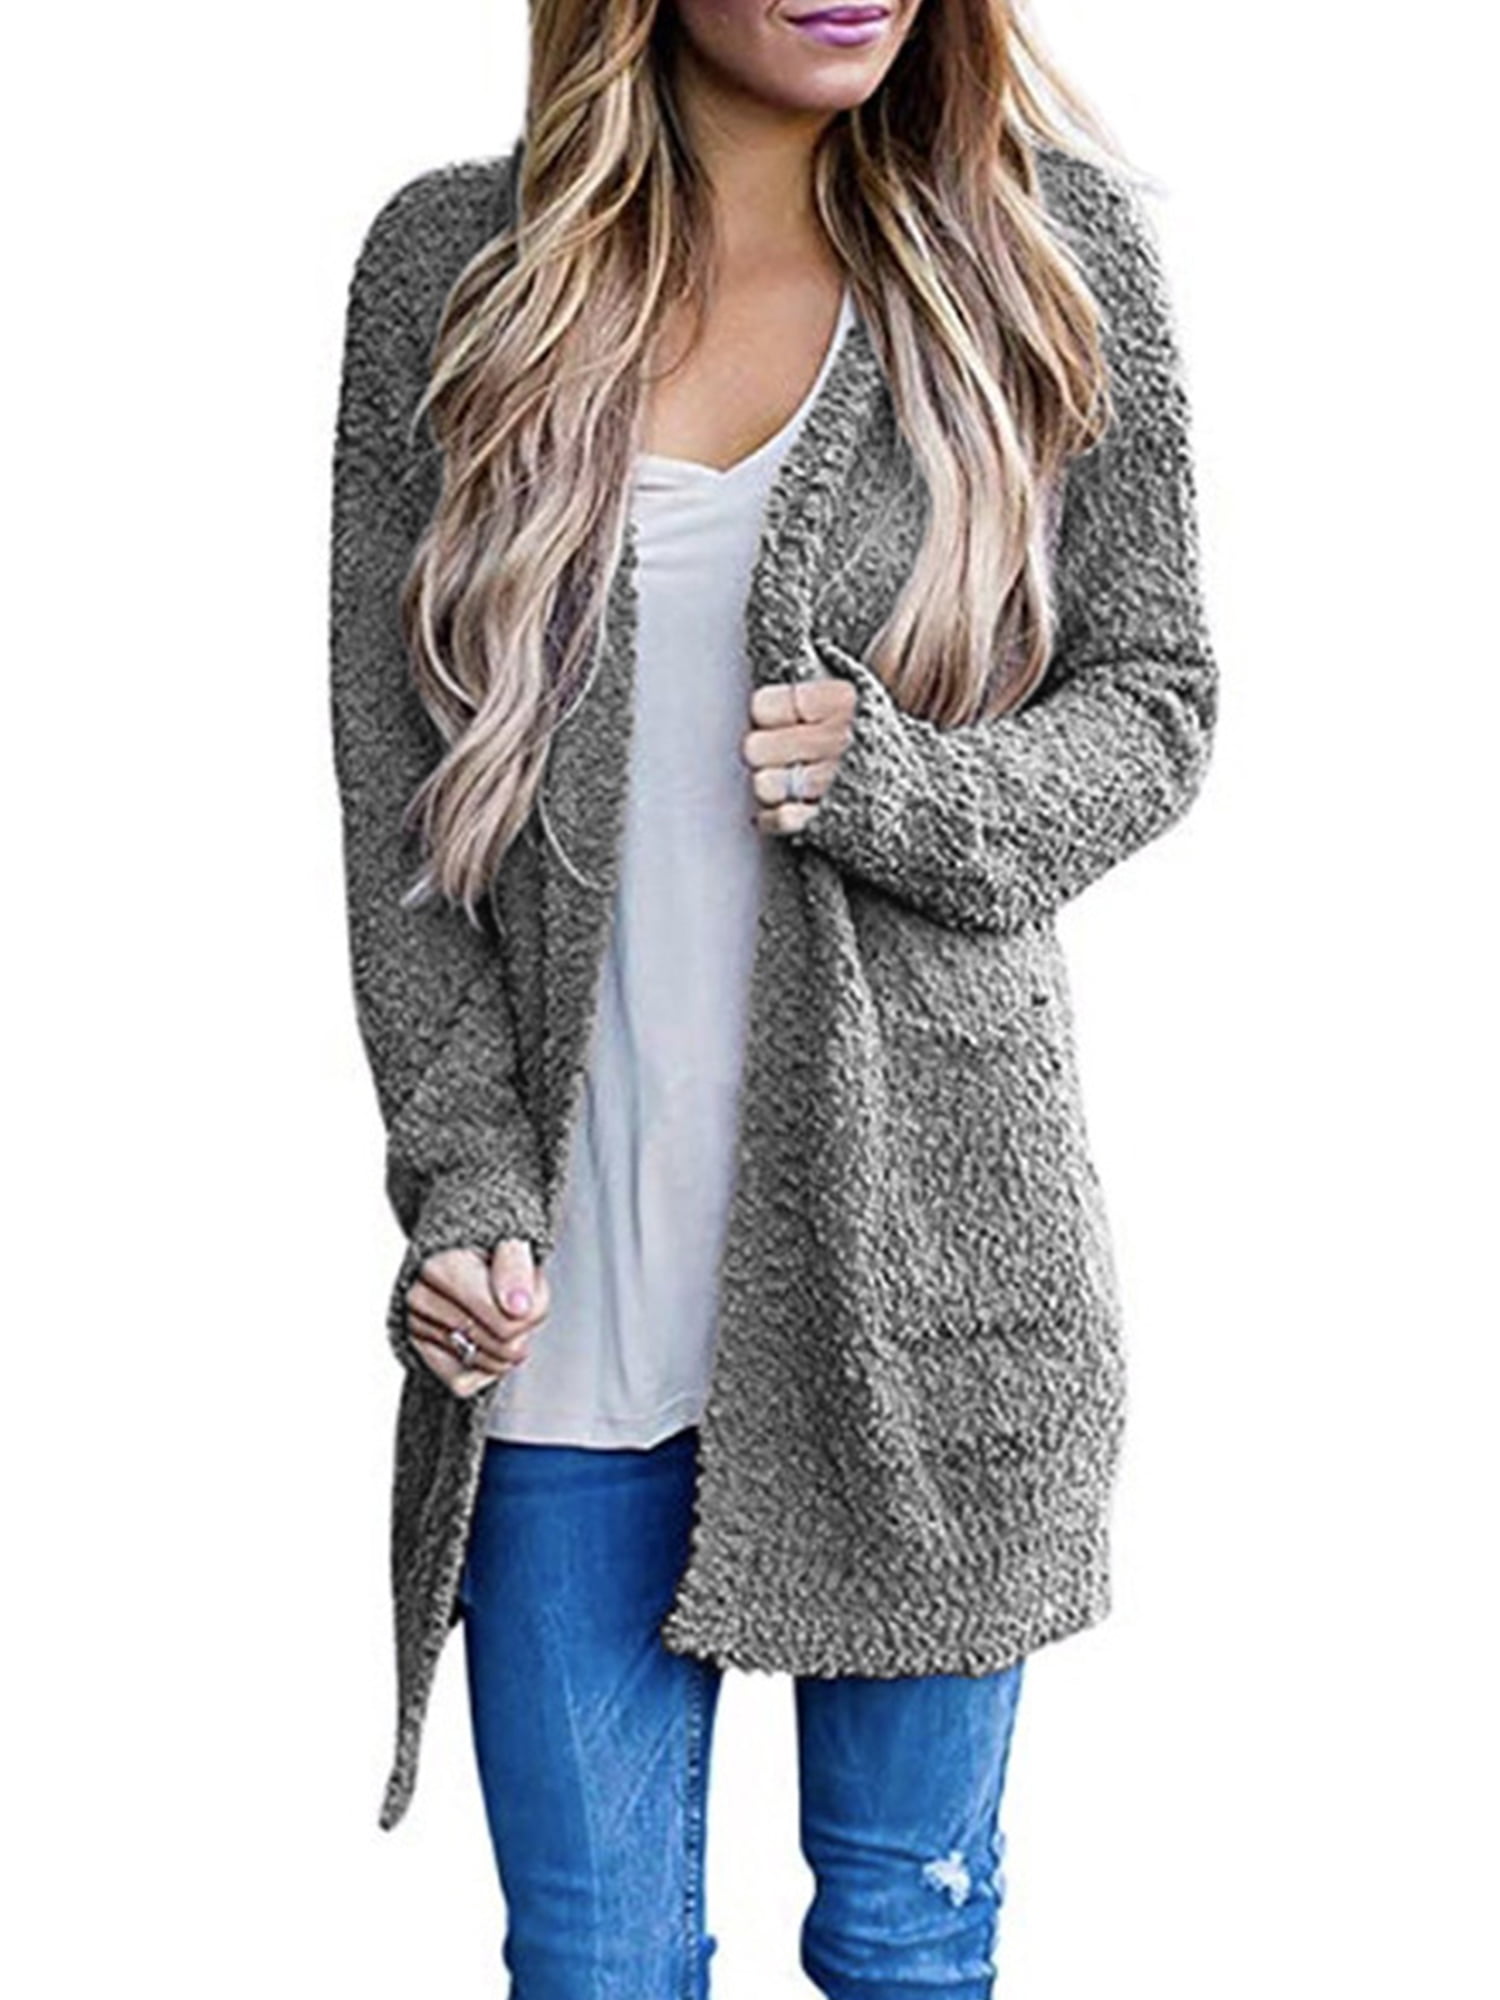 Sweaters for Women Womens Long Sleeve Open Front Cardigan Lightweight Coat Casual Fall Sweater Tops with Pockets 